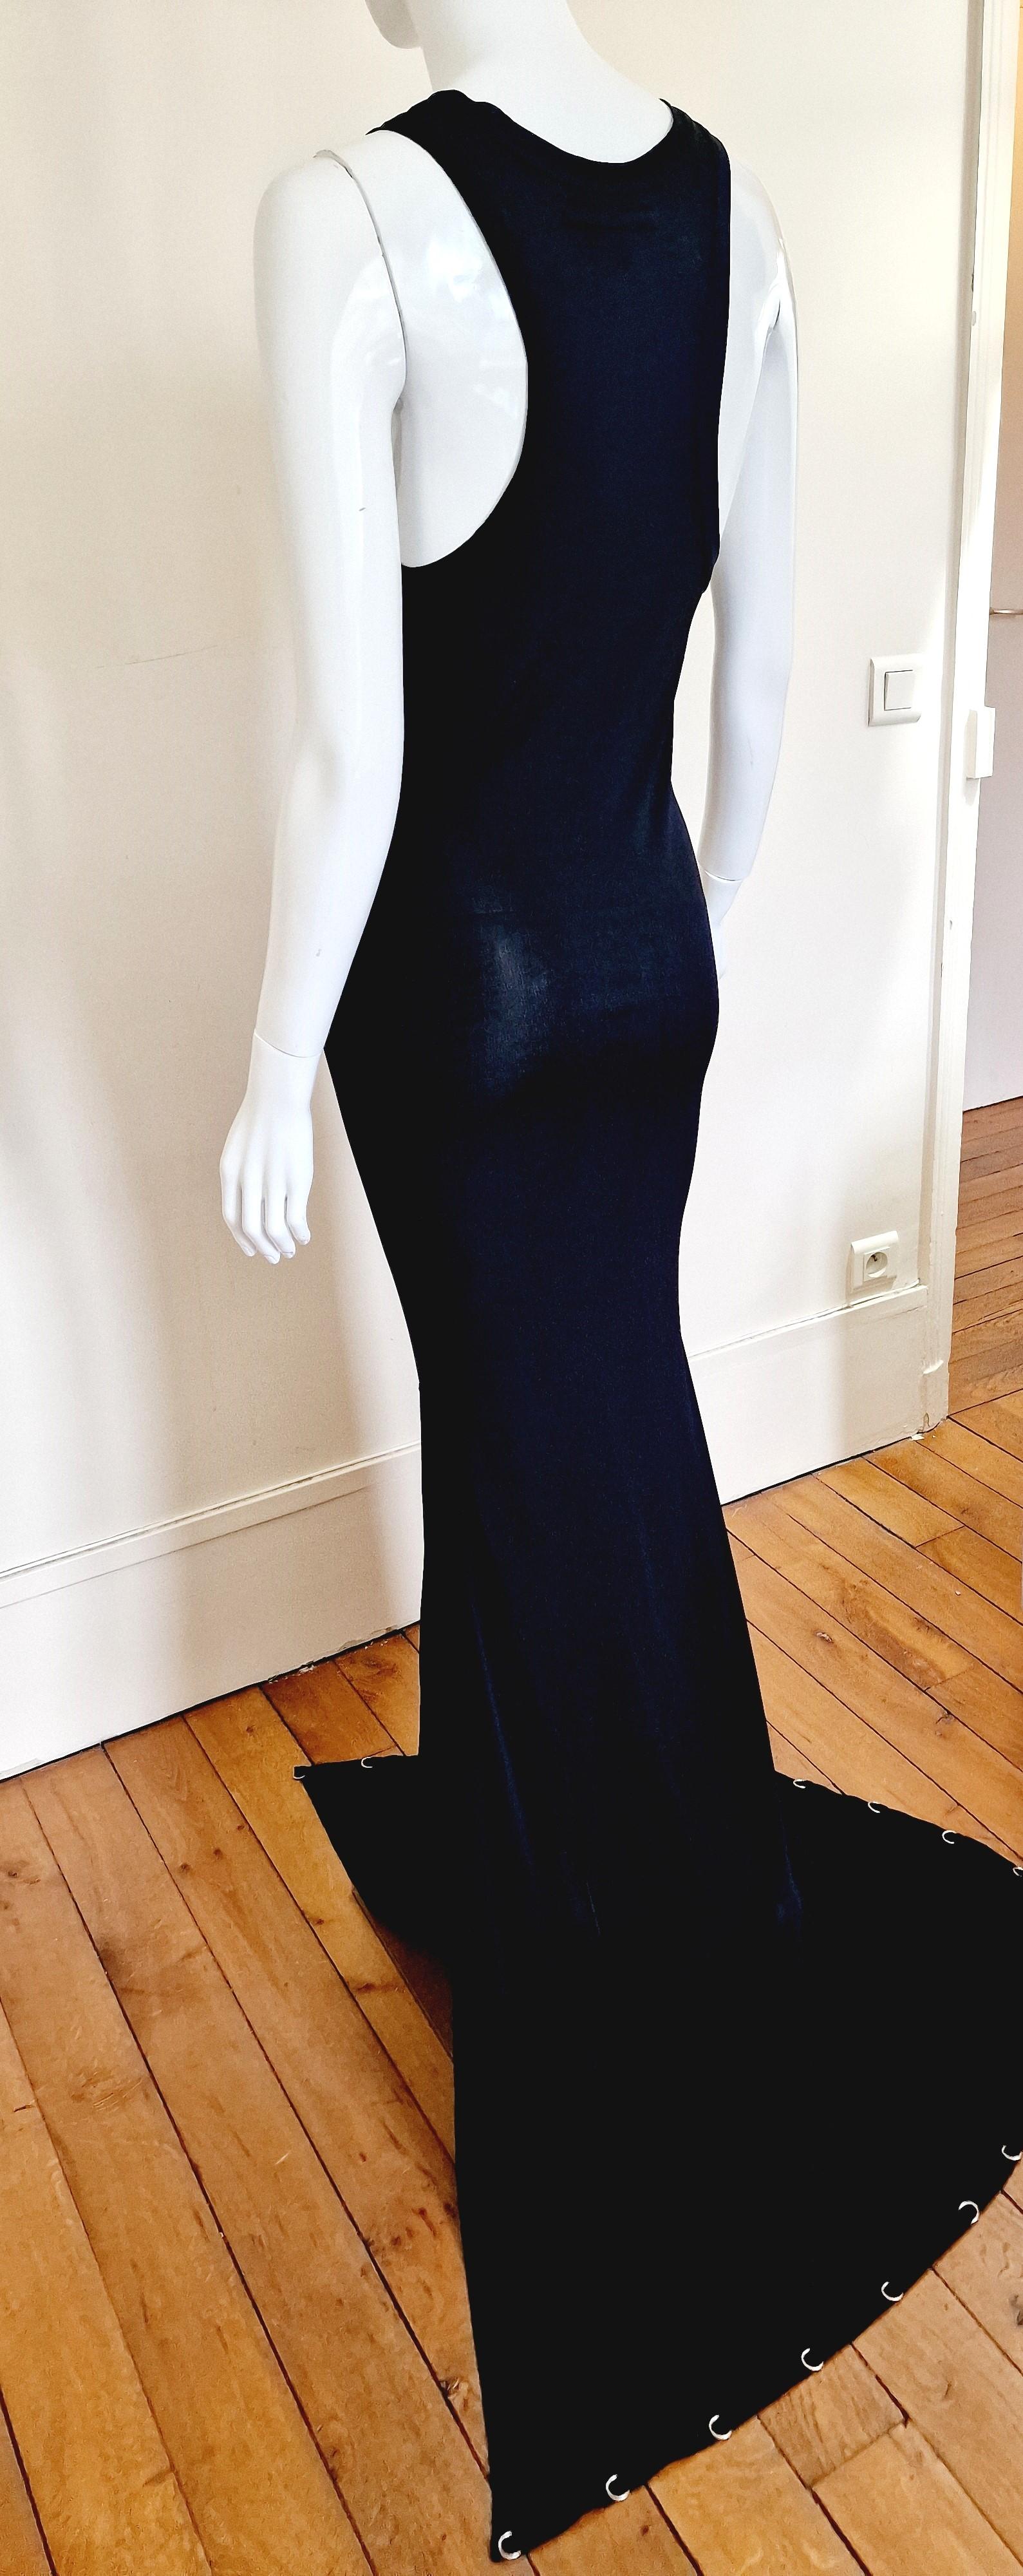 Jean Paul Gaultier Chain Metal Ring Black Vintage 90s Medium Evening Dress Gown For Sale 2